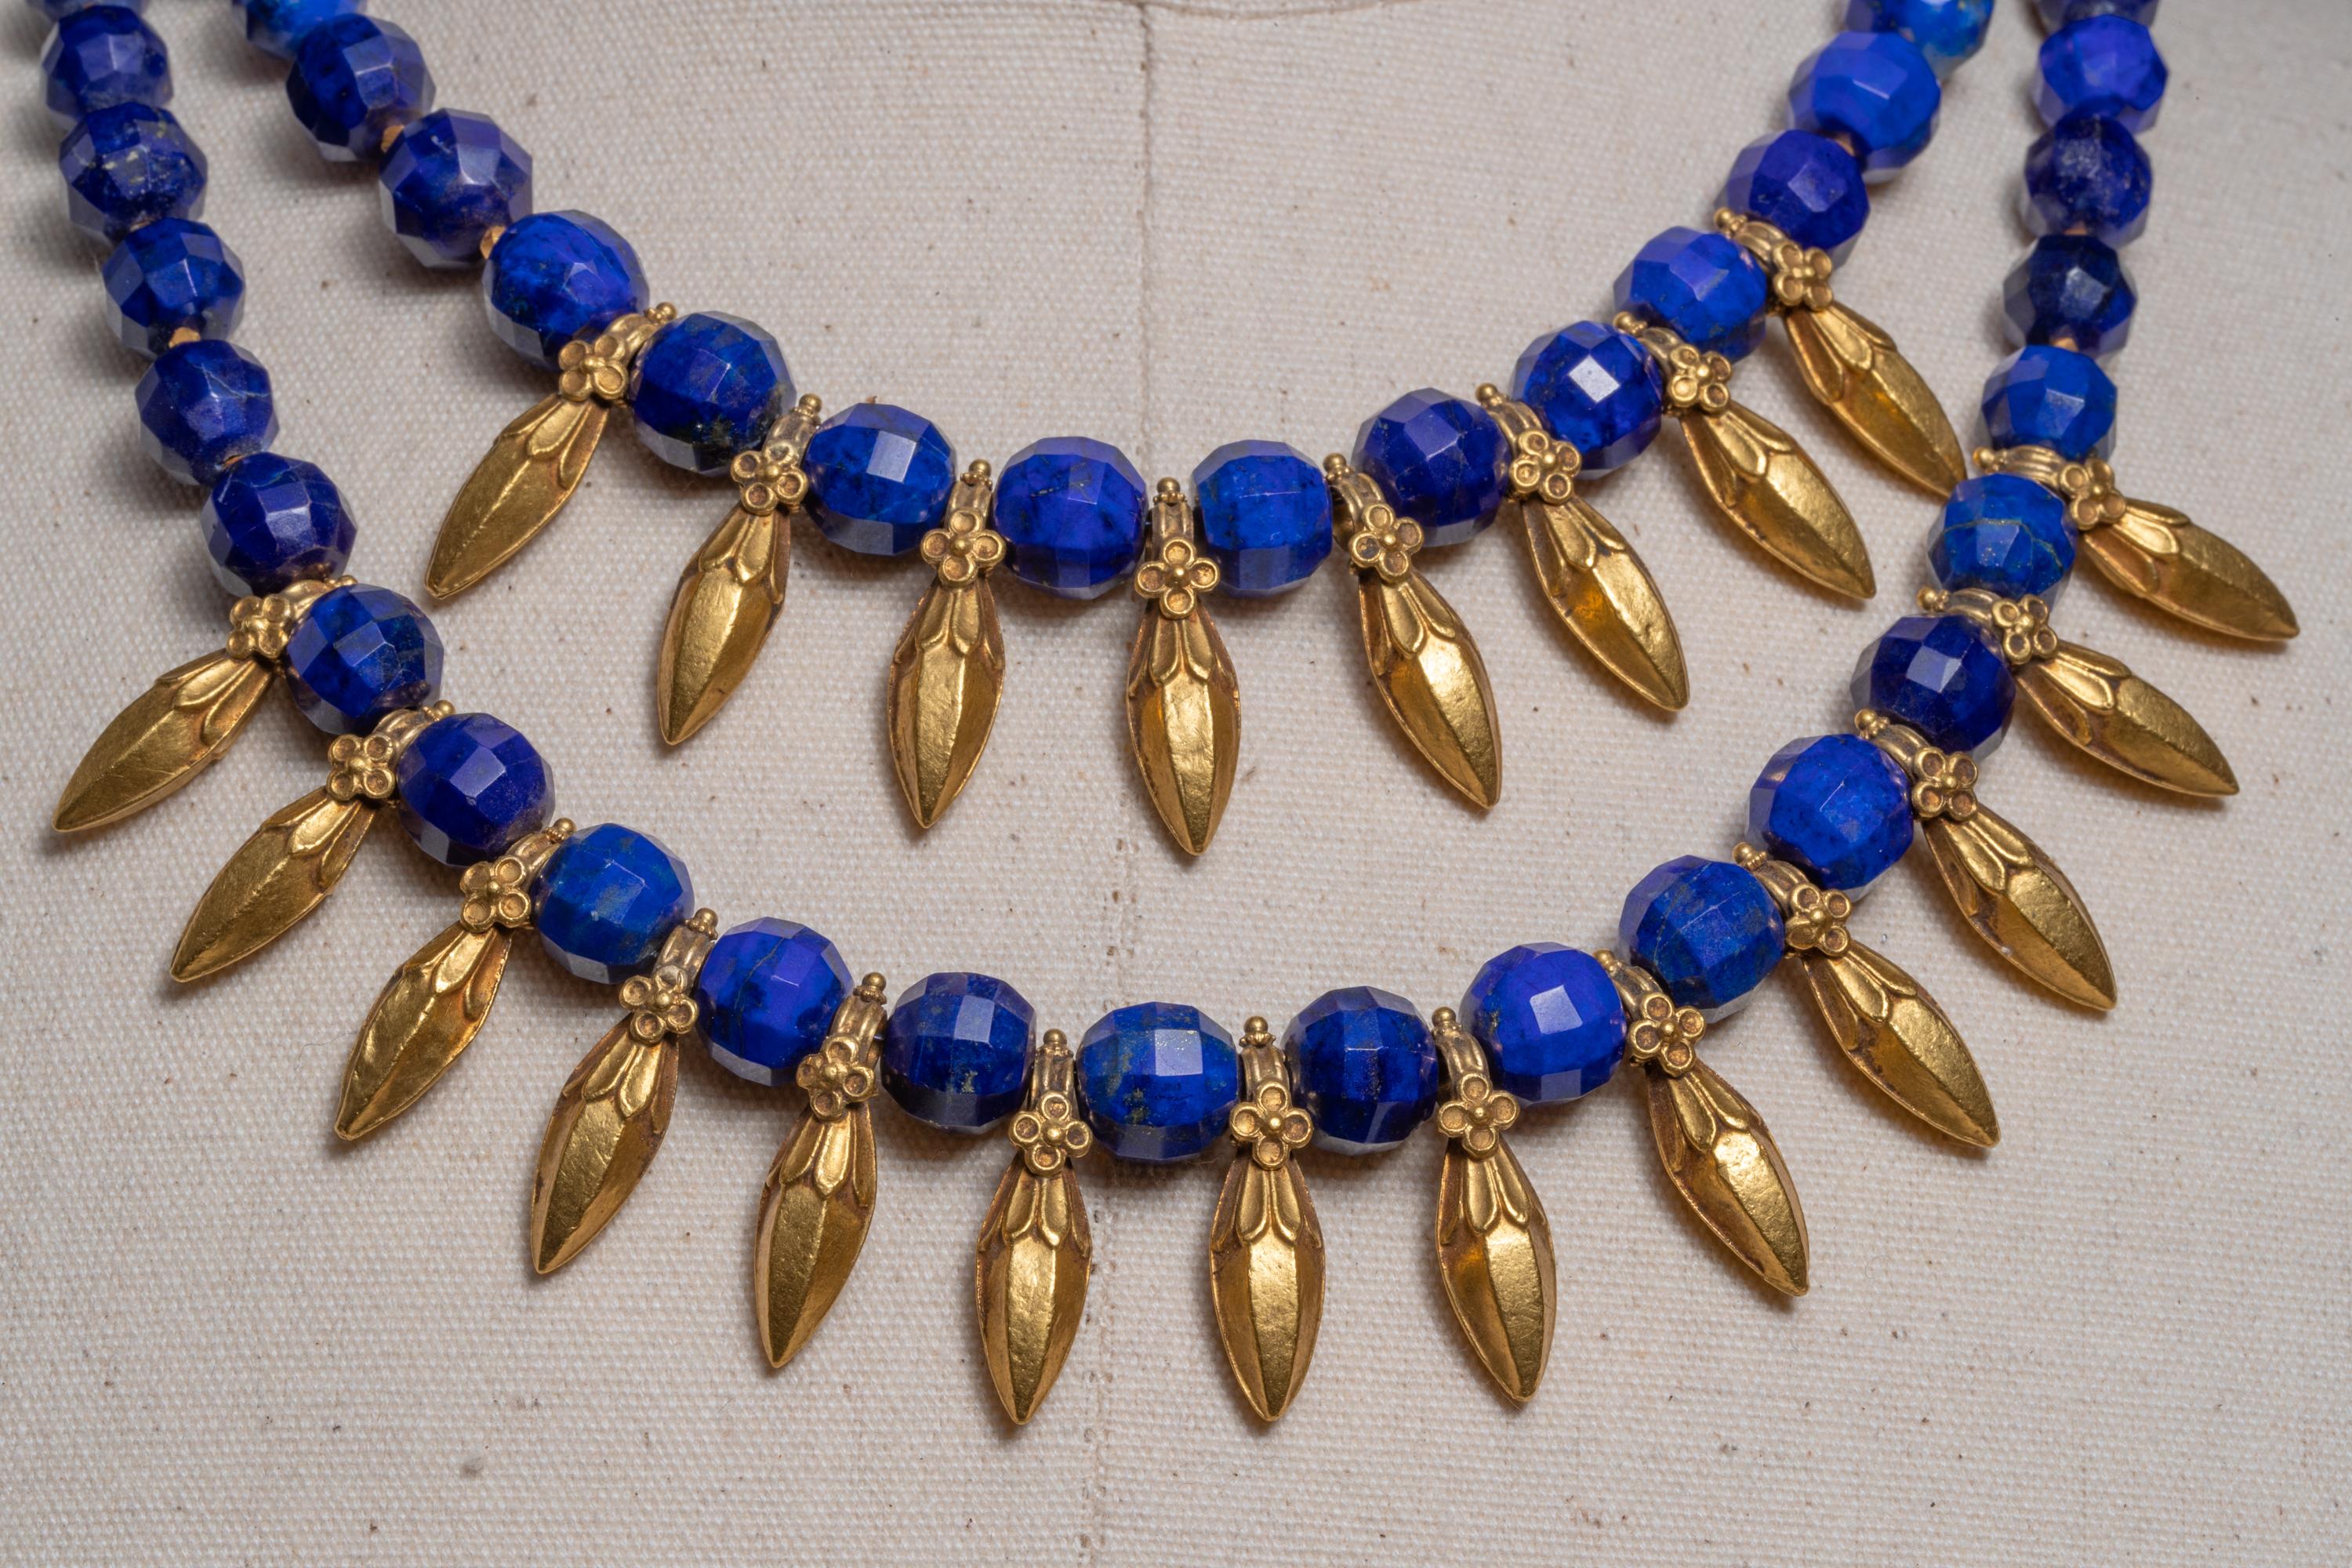 A double-line of old 22K gold spear-shaped pendants with fine detailing paired with exquisite peacock blue lapis lazuli.  Adding to the uniqueness, these lapis beads are faceted and the gold pendants have beautiful detailing.  The length of the